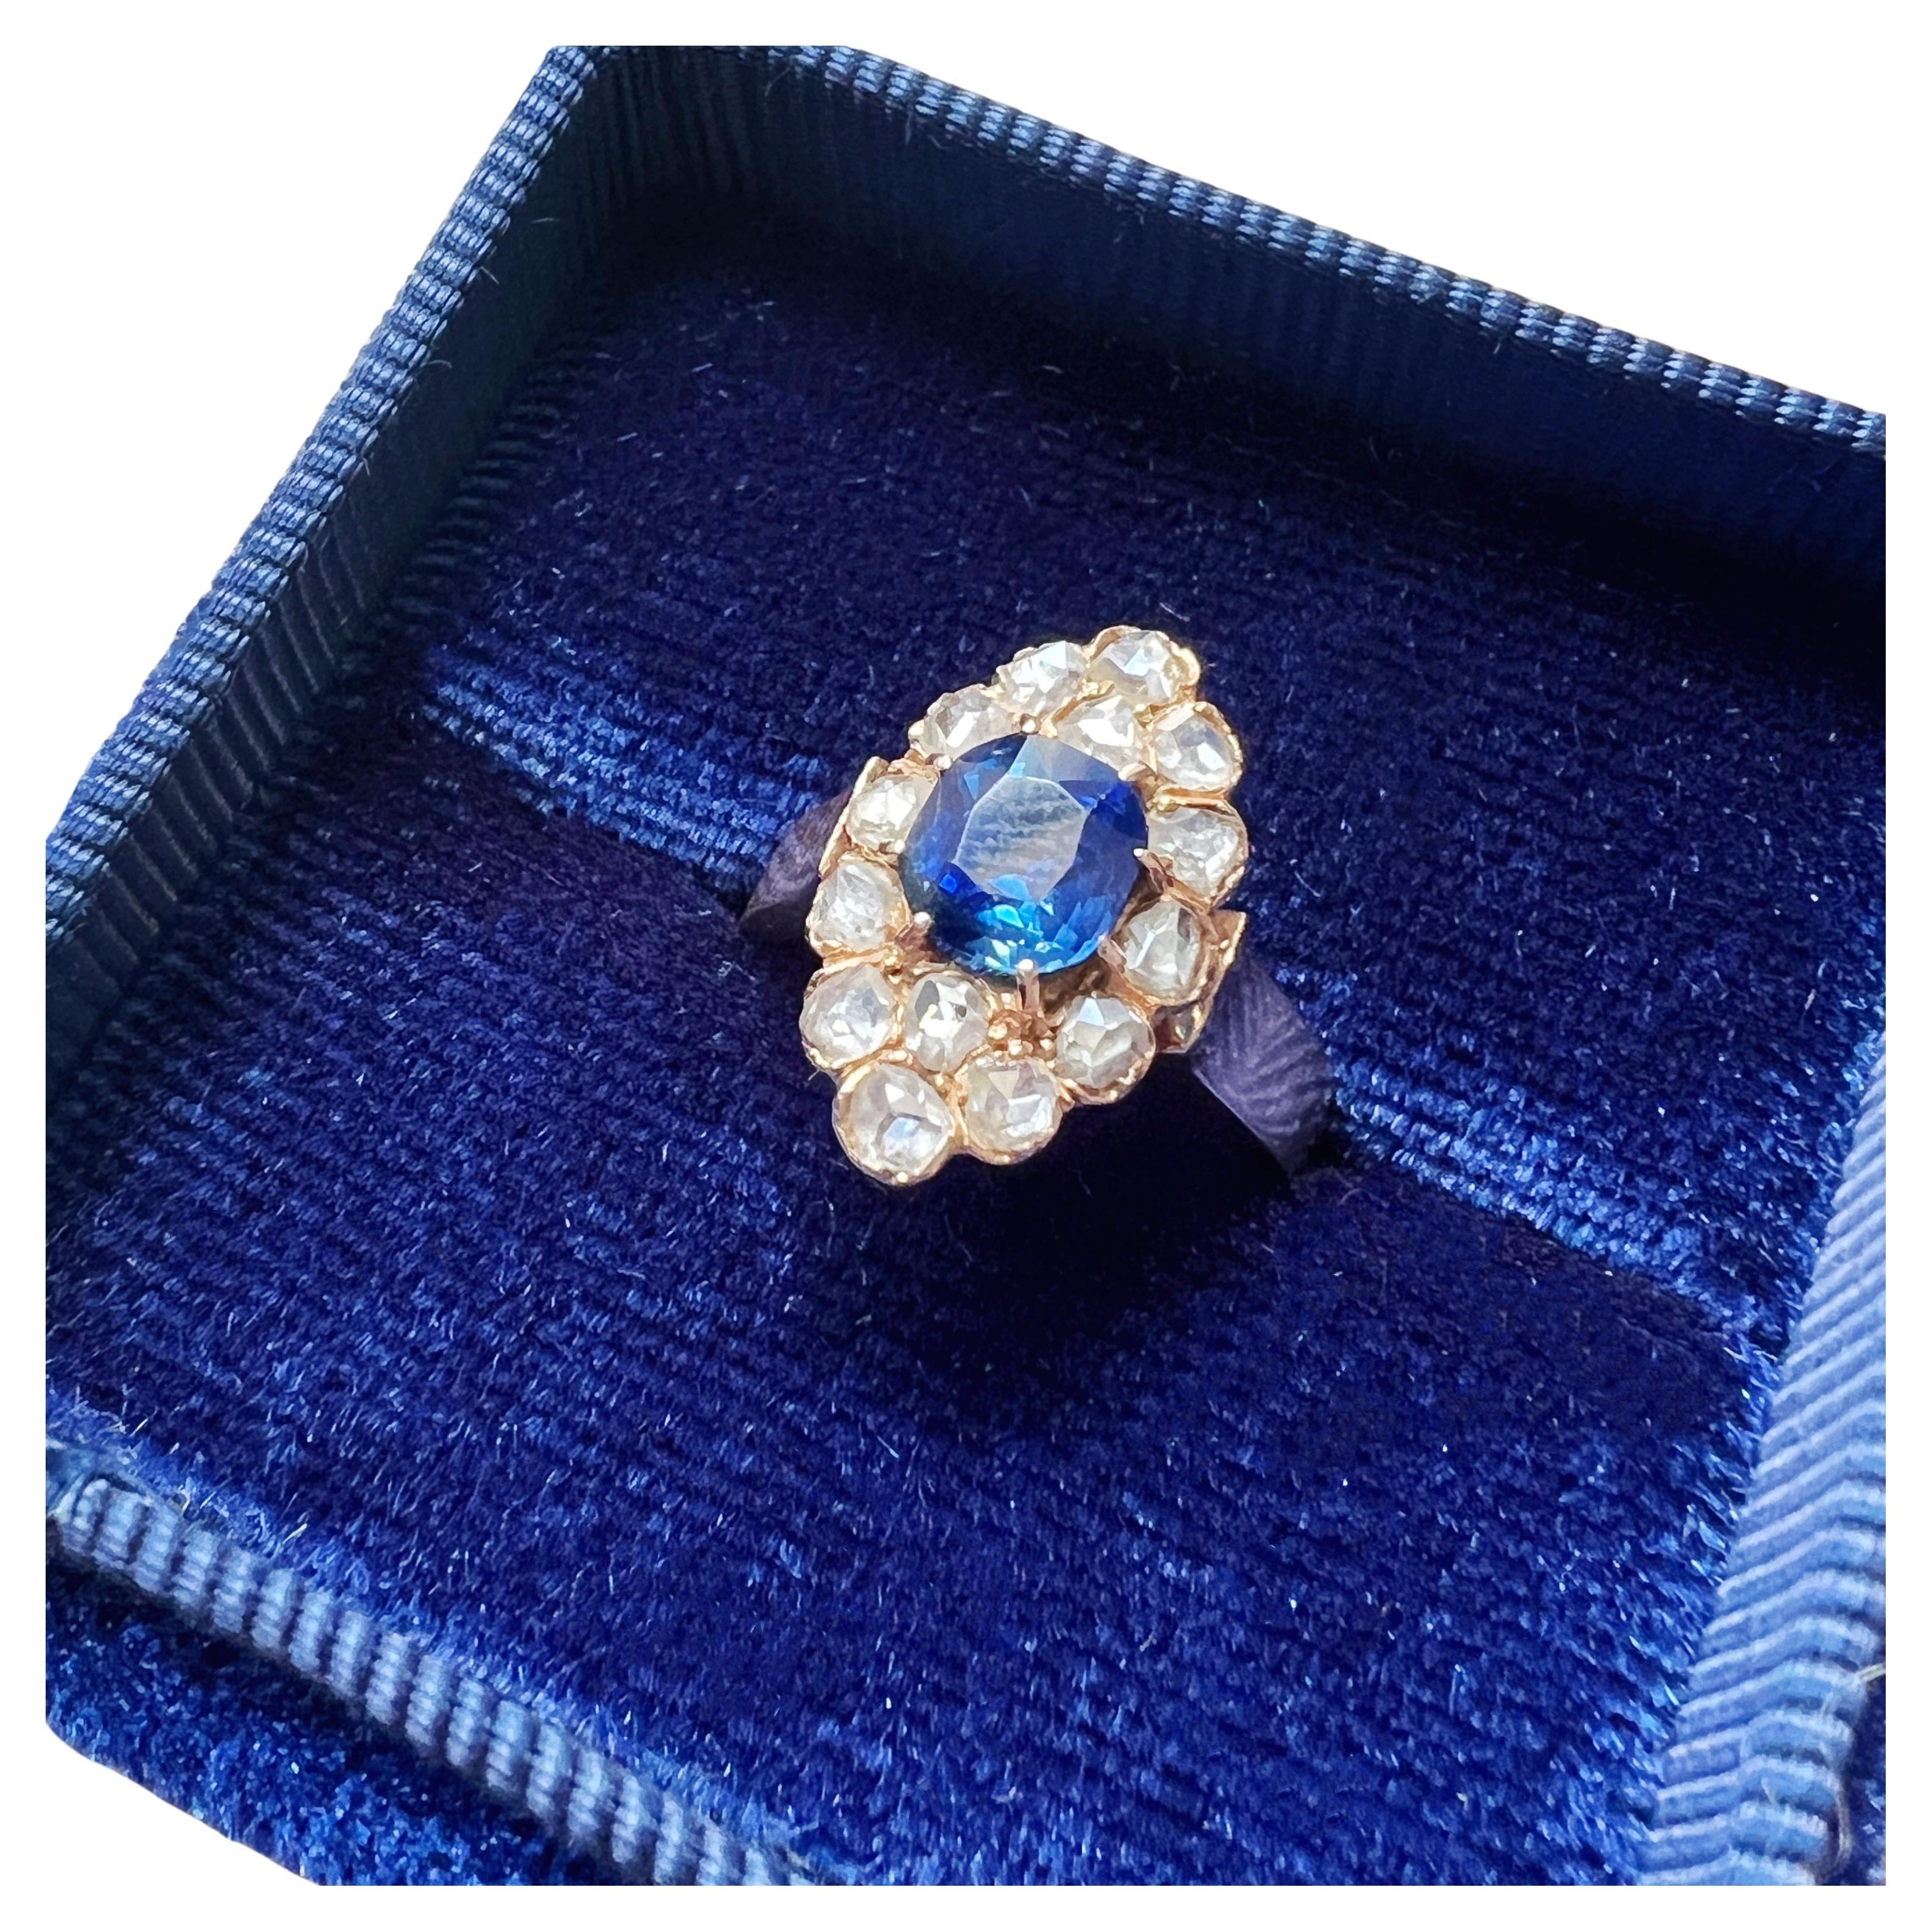 For sale a Victorian era 18K yellow gold, LFG certified natural unheated blue sapphire diamond ring.

At the heart of the ring is a breathtaking old cushion-cut blue sapphire that steals the spotlight. The sapphire's well-saturated royal blue color